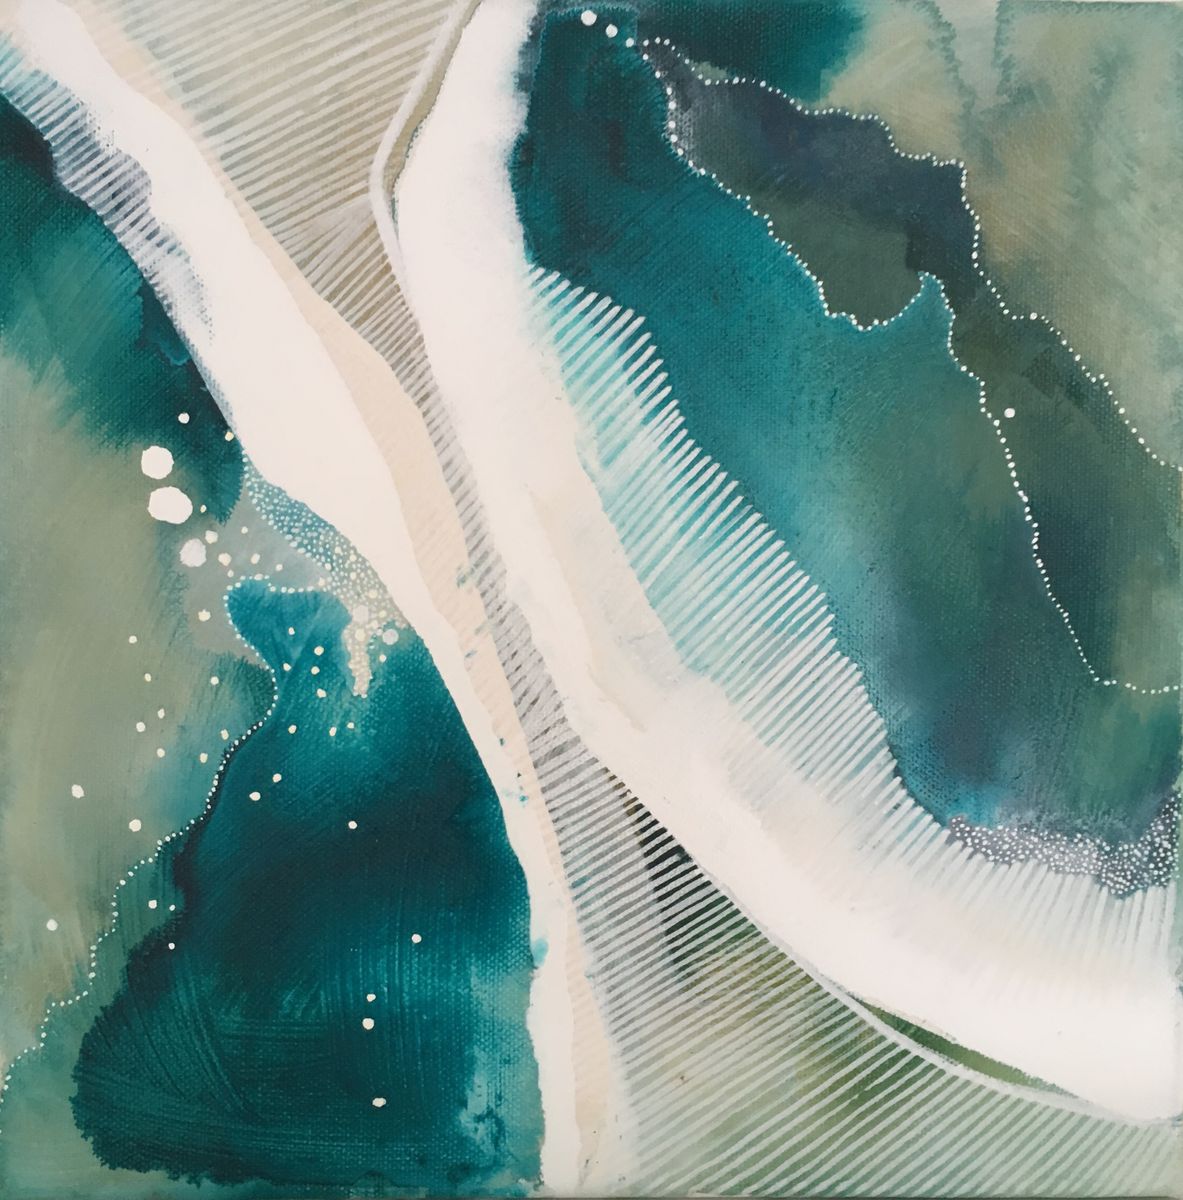  On the water no. 1  Watercolour, ink and acrylic on canvas  30x30 cm  £260 